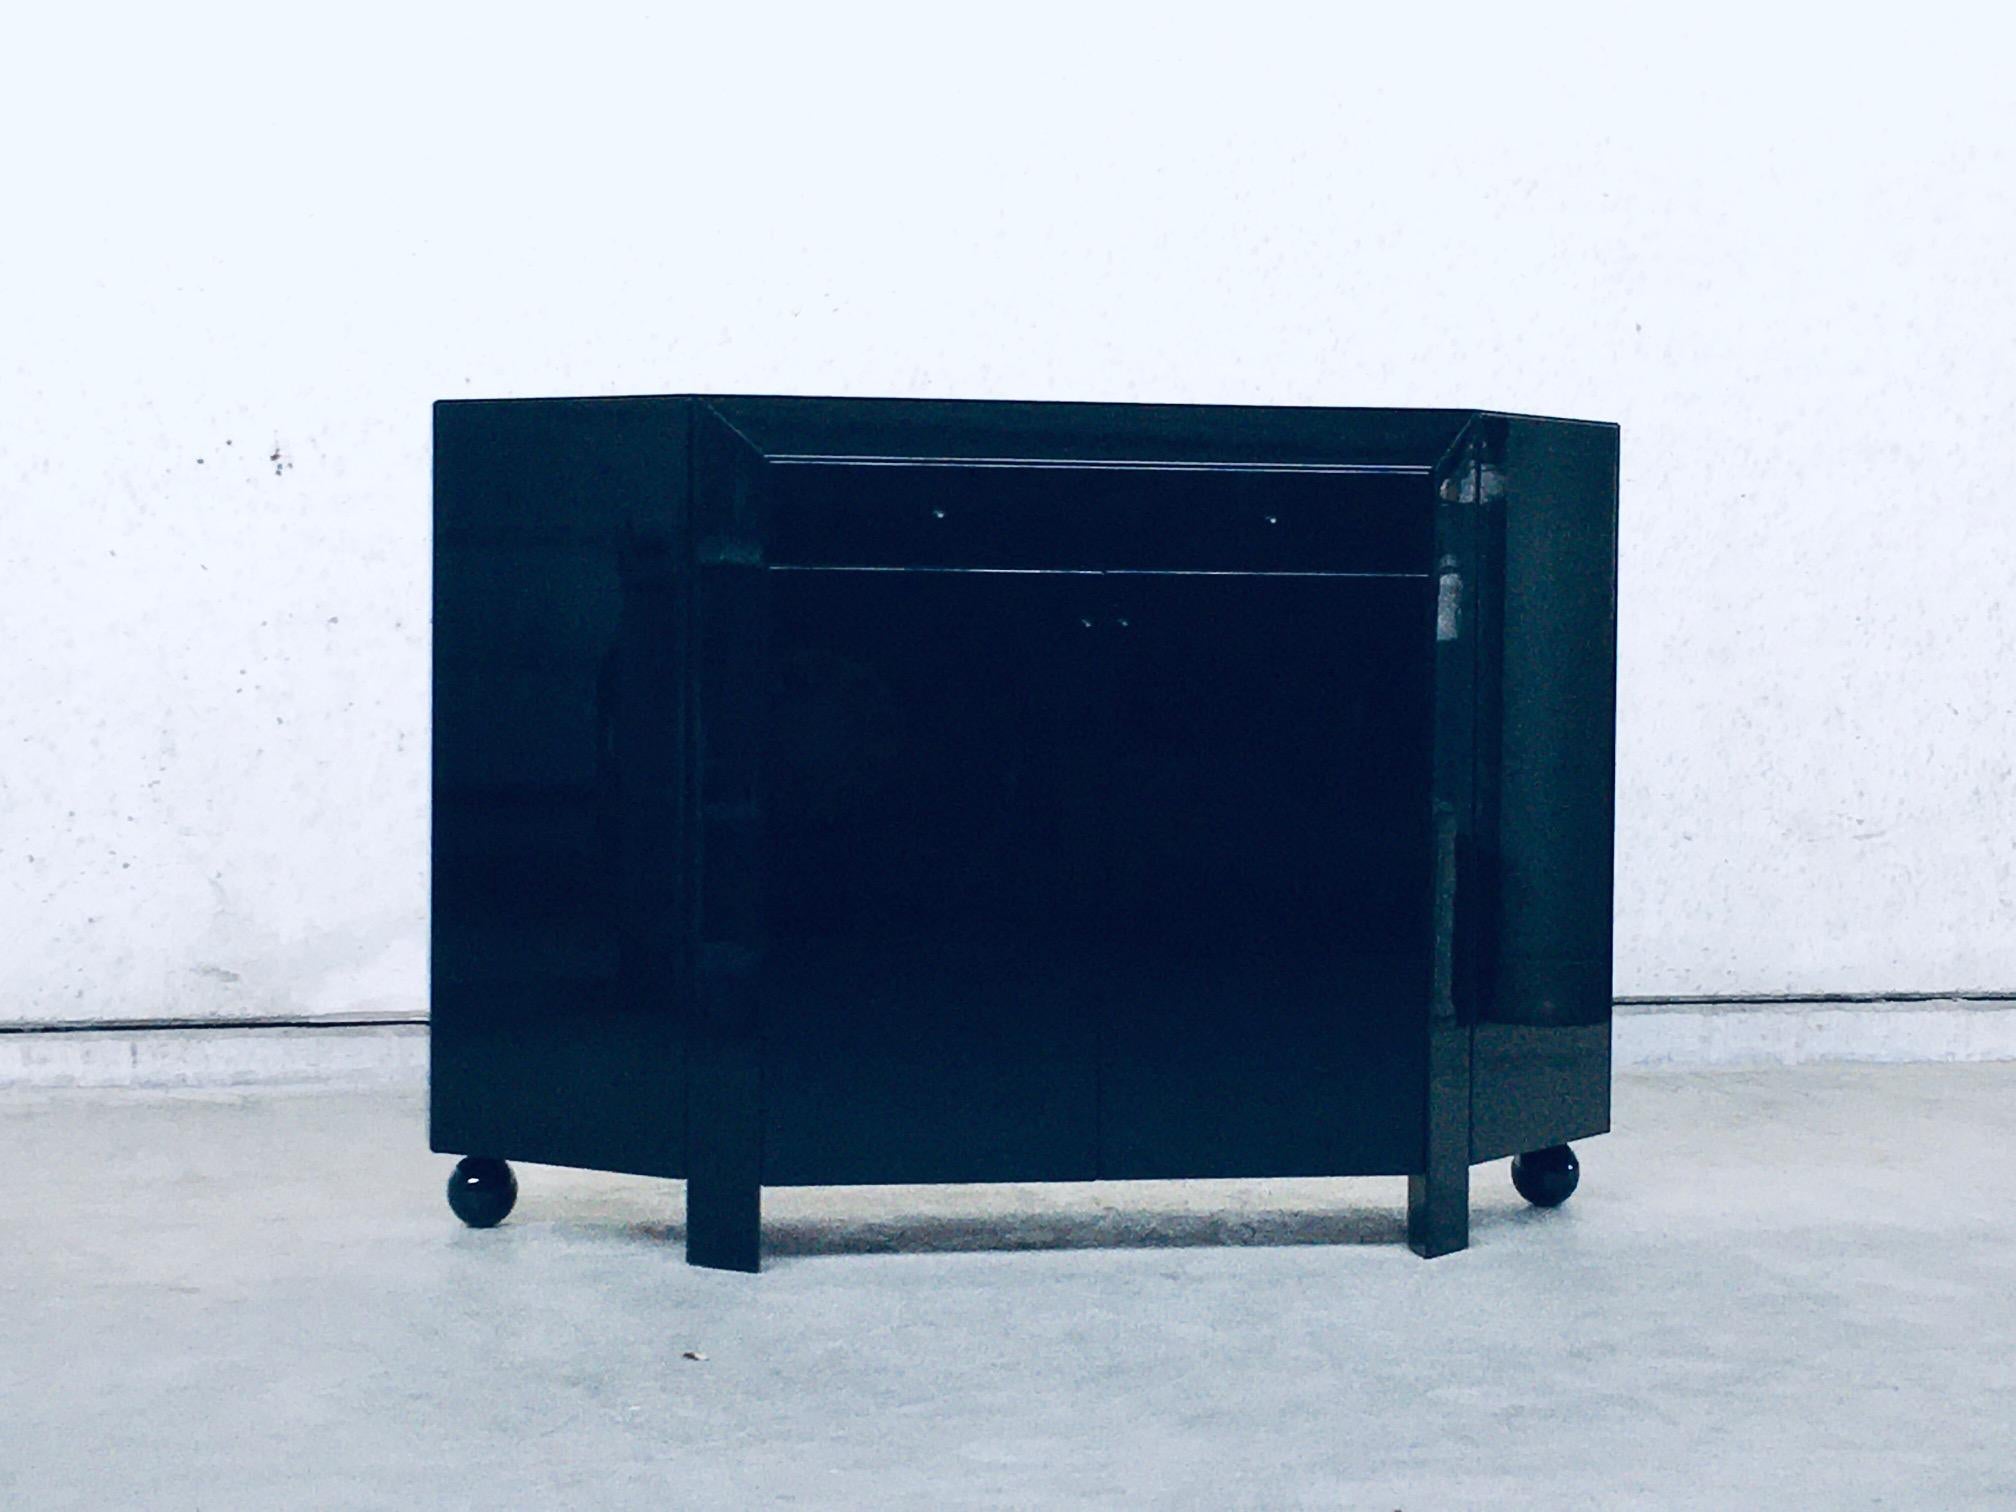 Postmodern Modern Architectural Design Bar Chest Cabinet by Interlübke, Germany 1980's. Black high gloss laquered wood cabinet bar chest. High quality finish. On each corner a side door with press release mechanism, a drawer and 2 panel doors in the